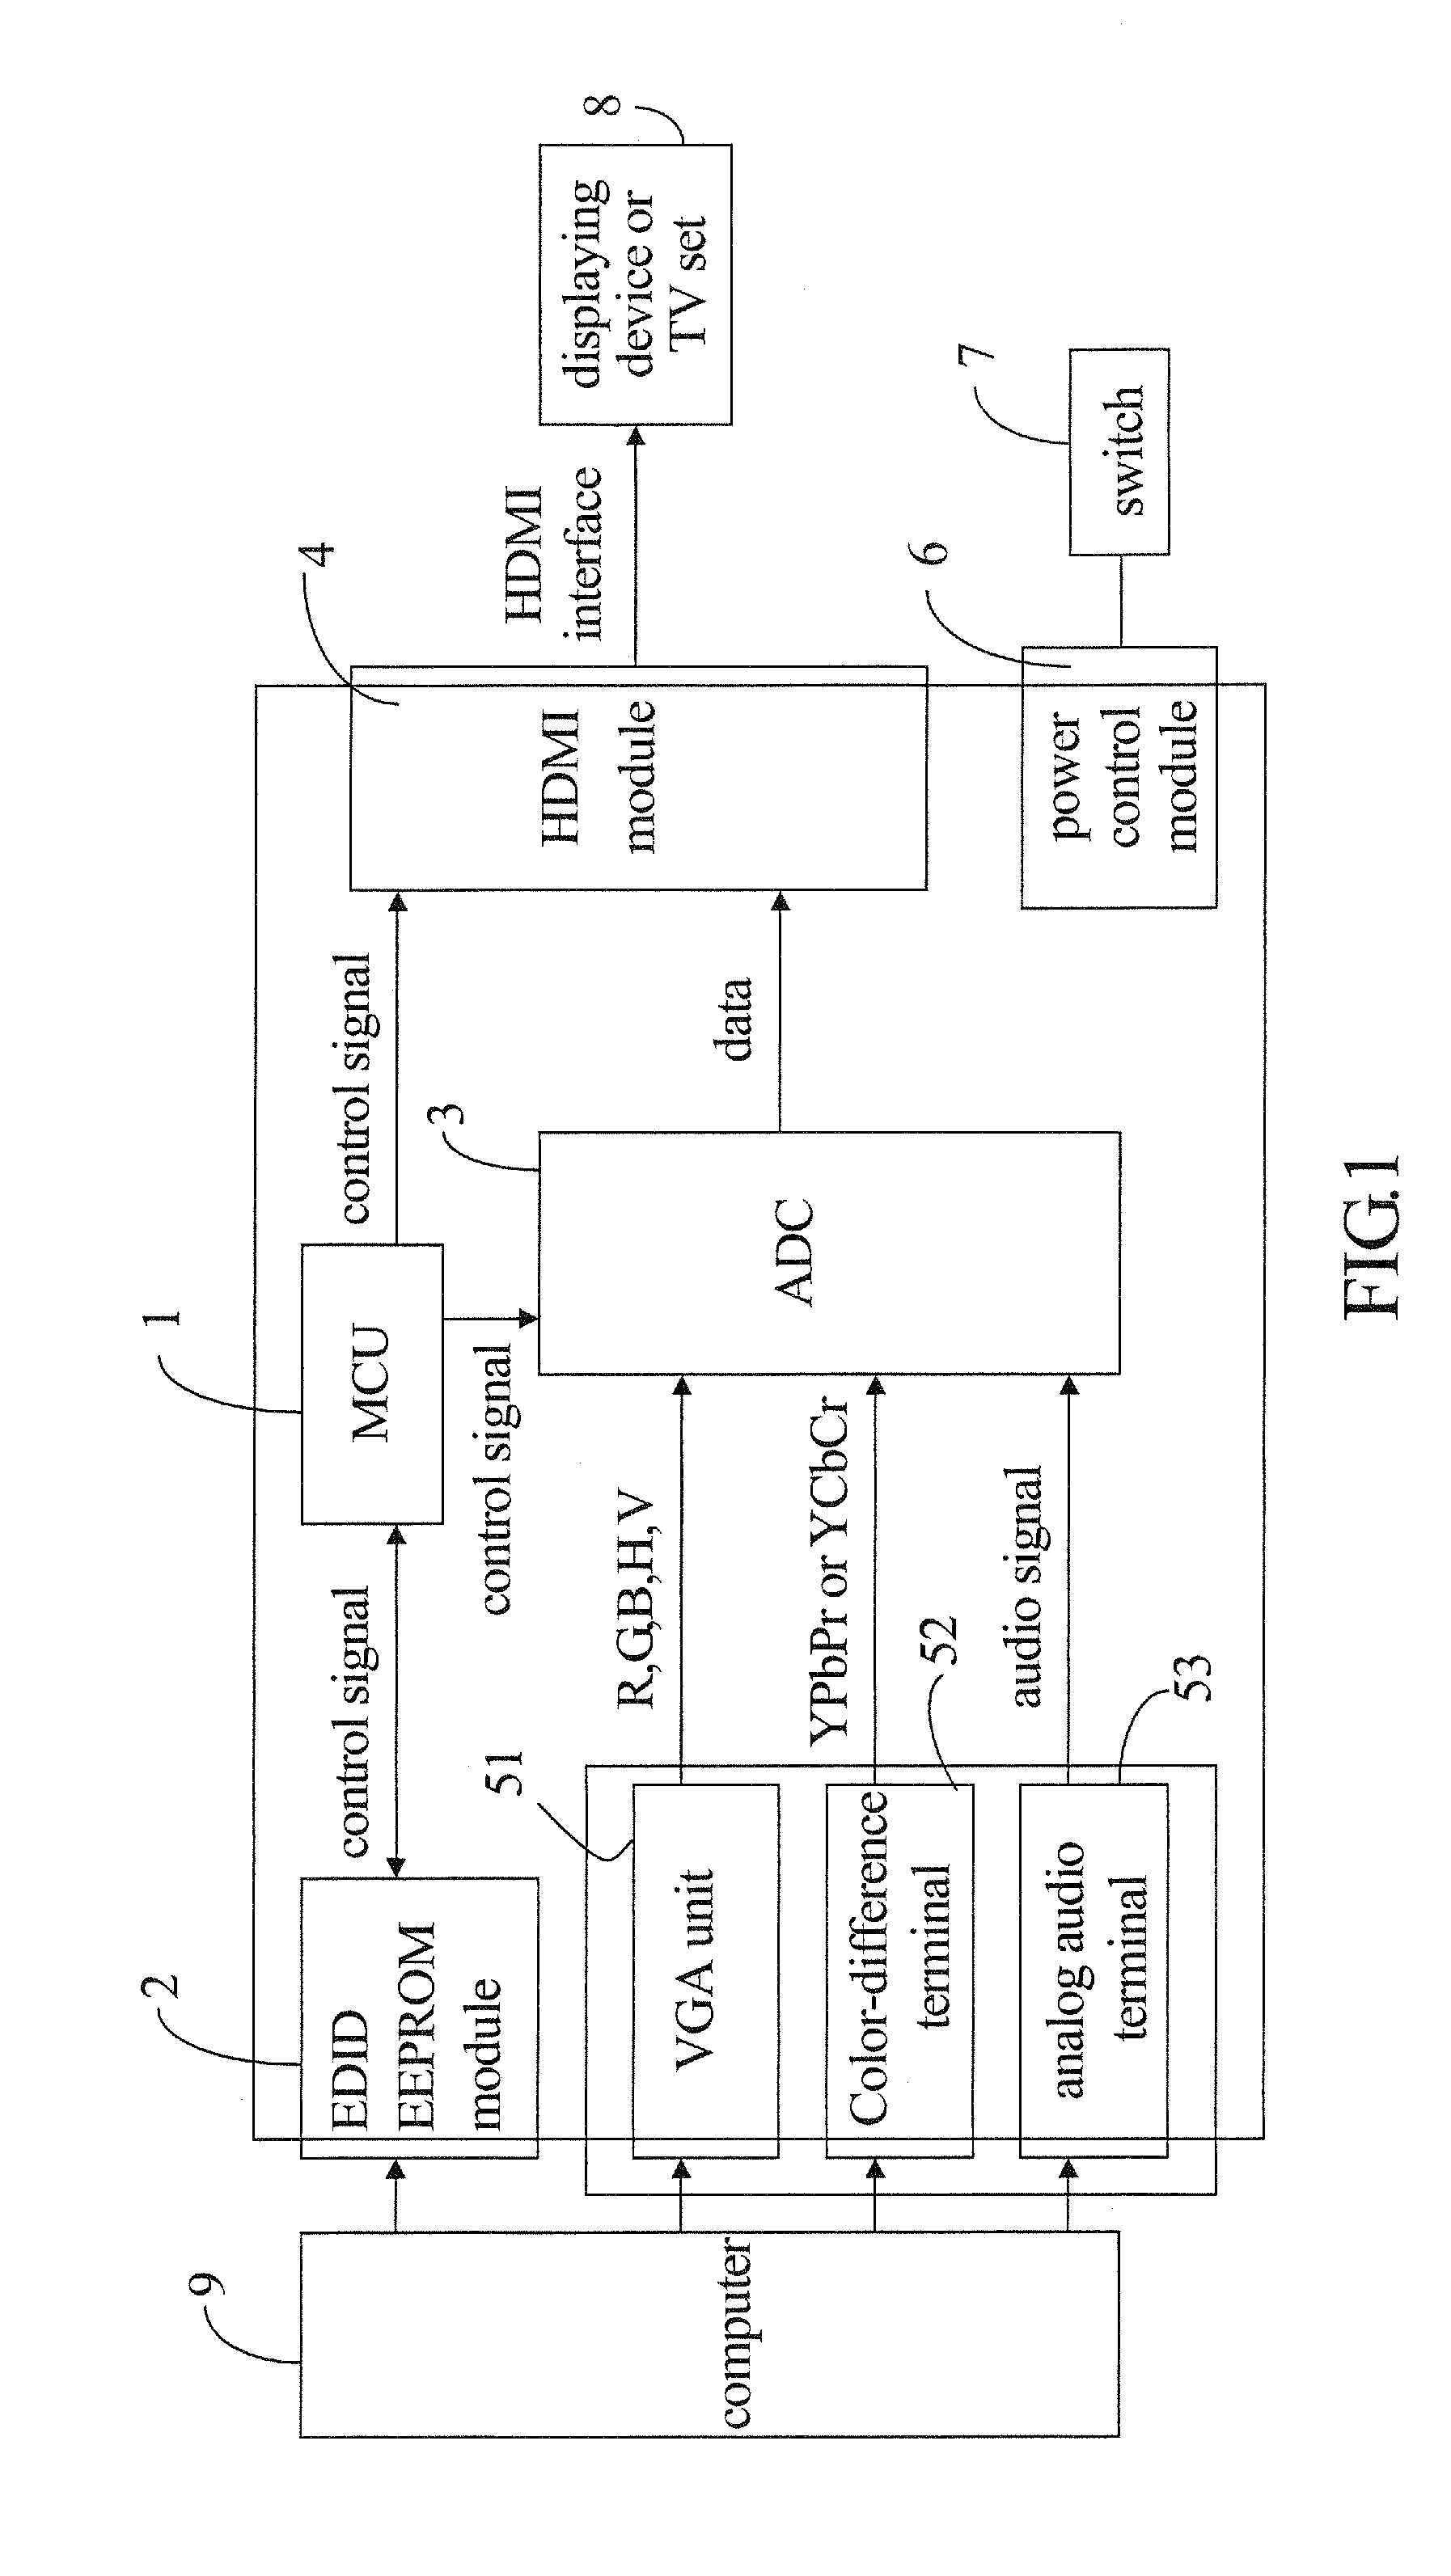 Device having functions of high definition conversion and audio supporting